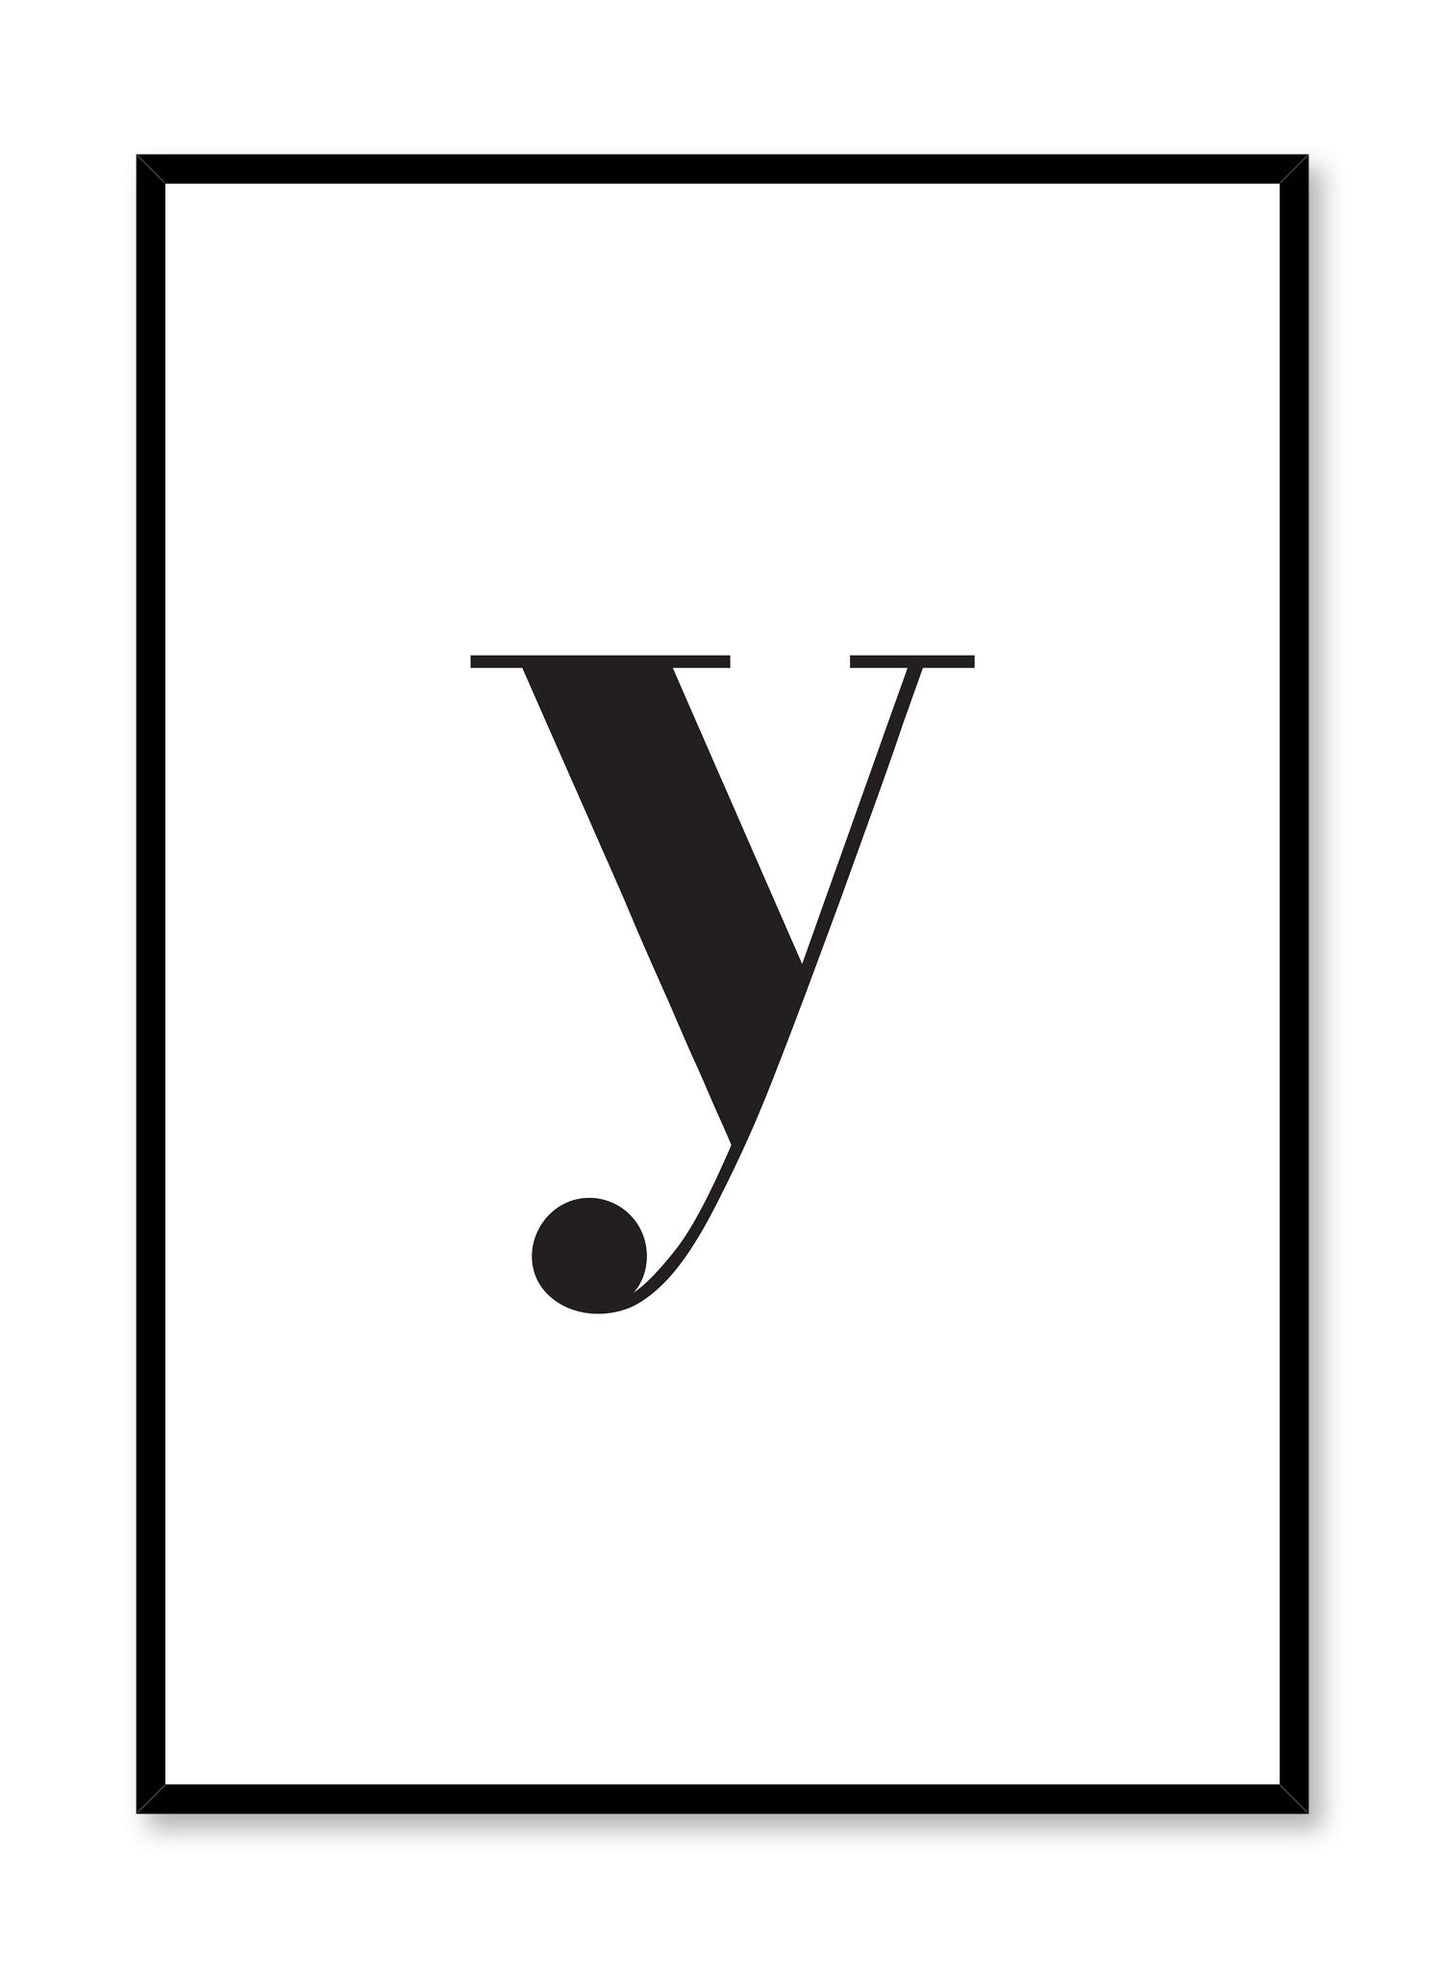 Scandinavian poster with black and white graphic typography design of lowercase letter Y by Opposite Wall